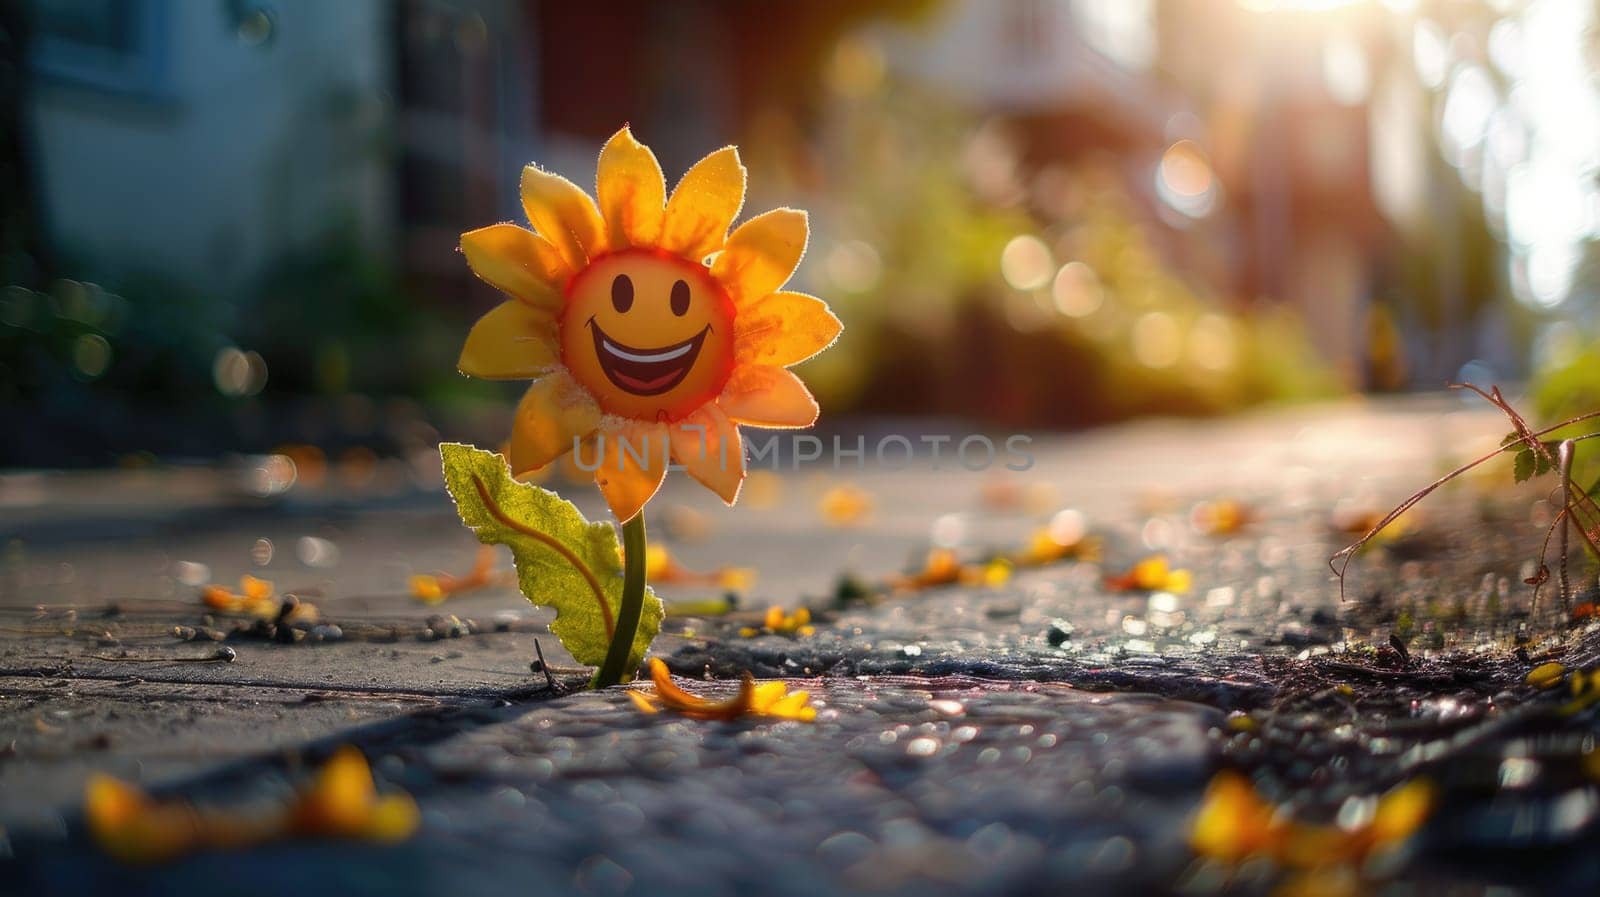 A smiling flower is surrounded by flowers and leaves on the cracked road.